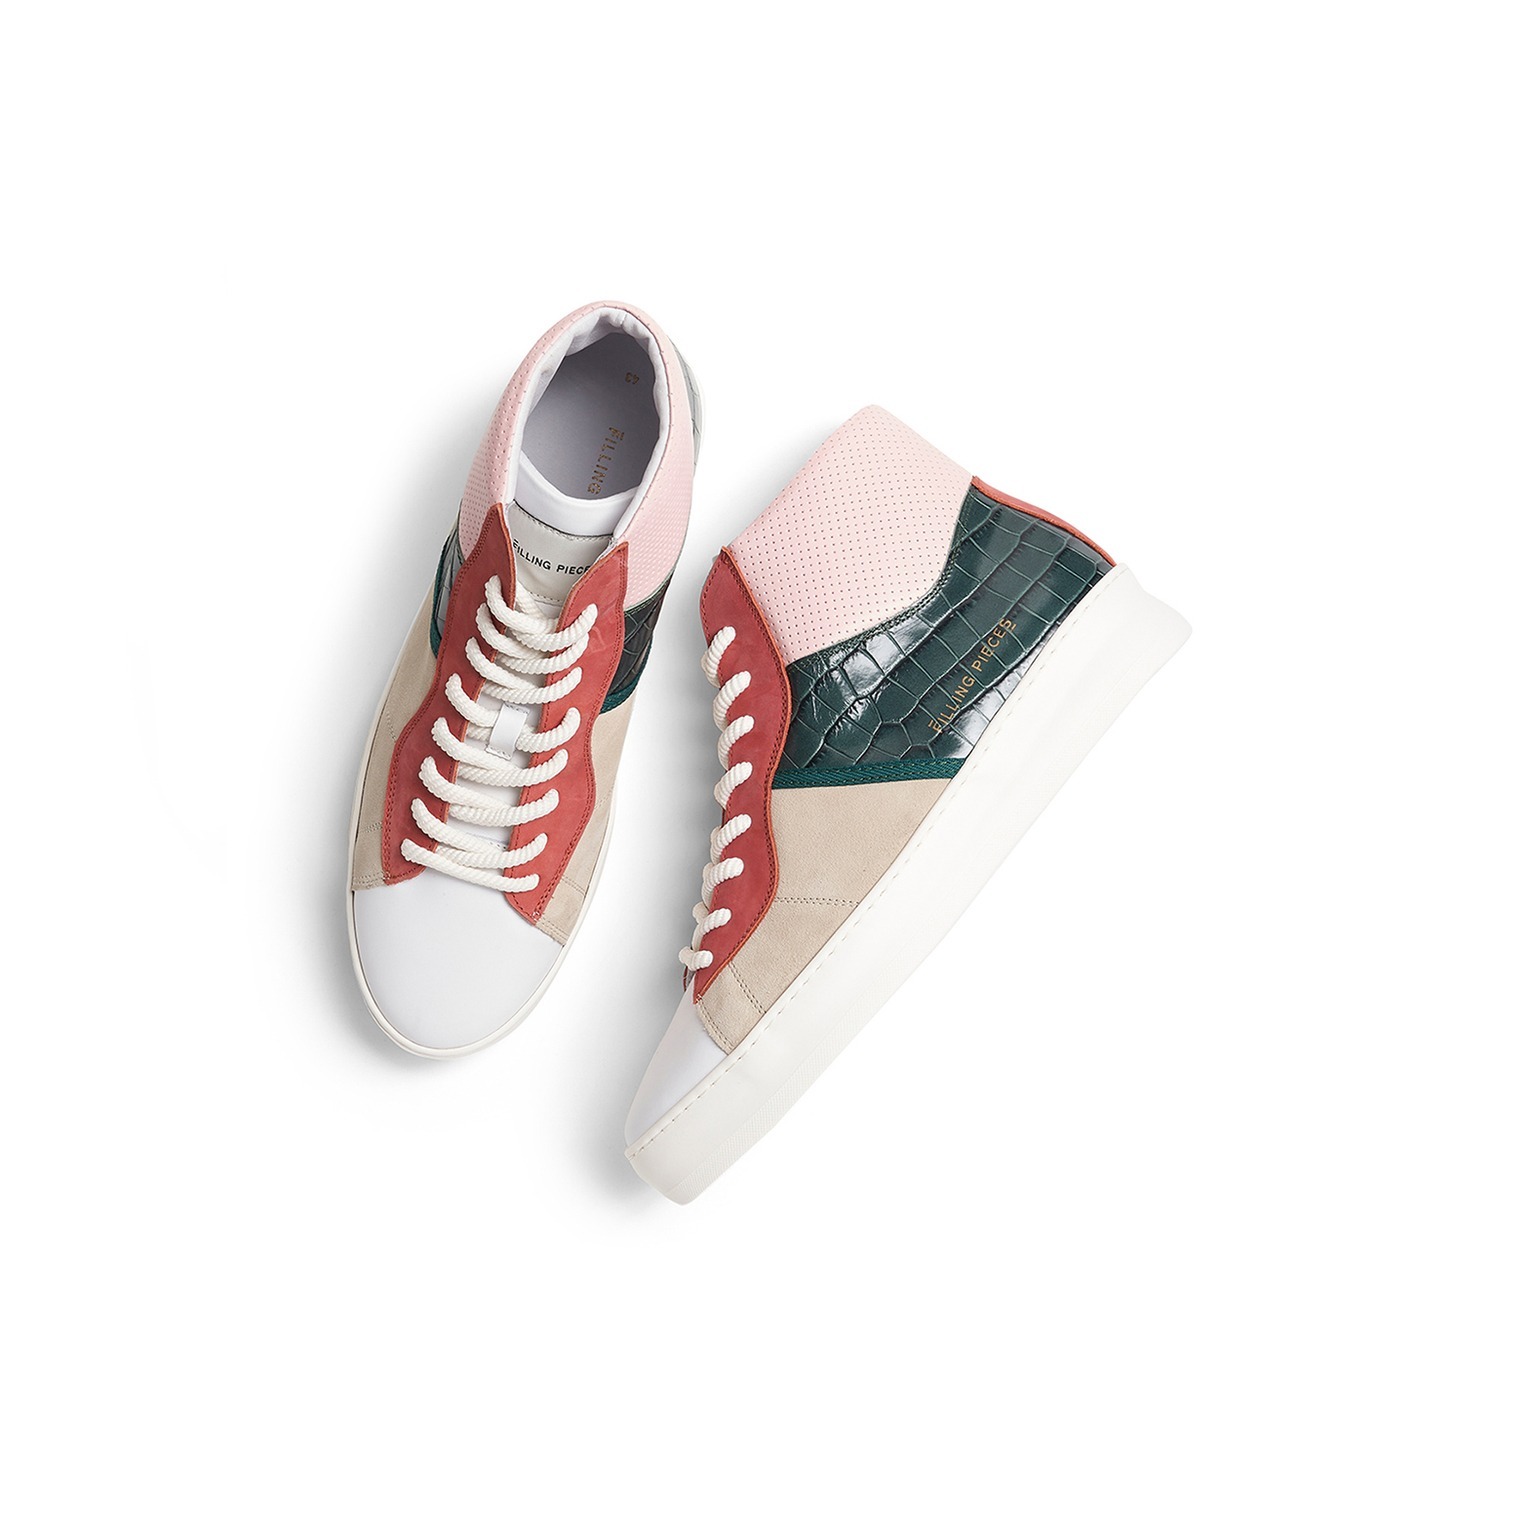 PIECES FILLING PIECES Women's Sneakers